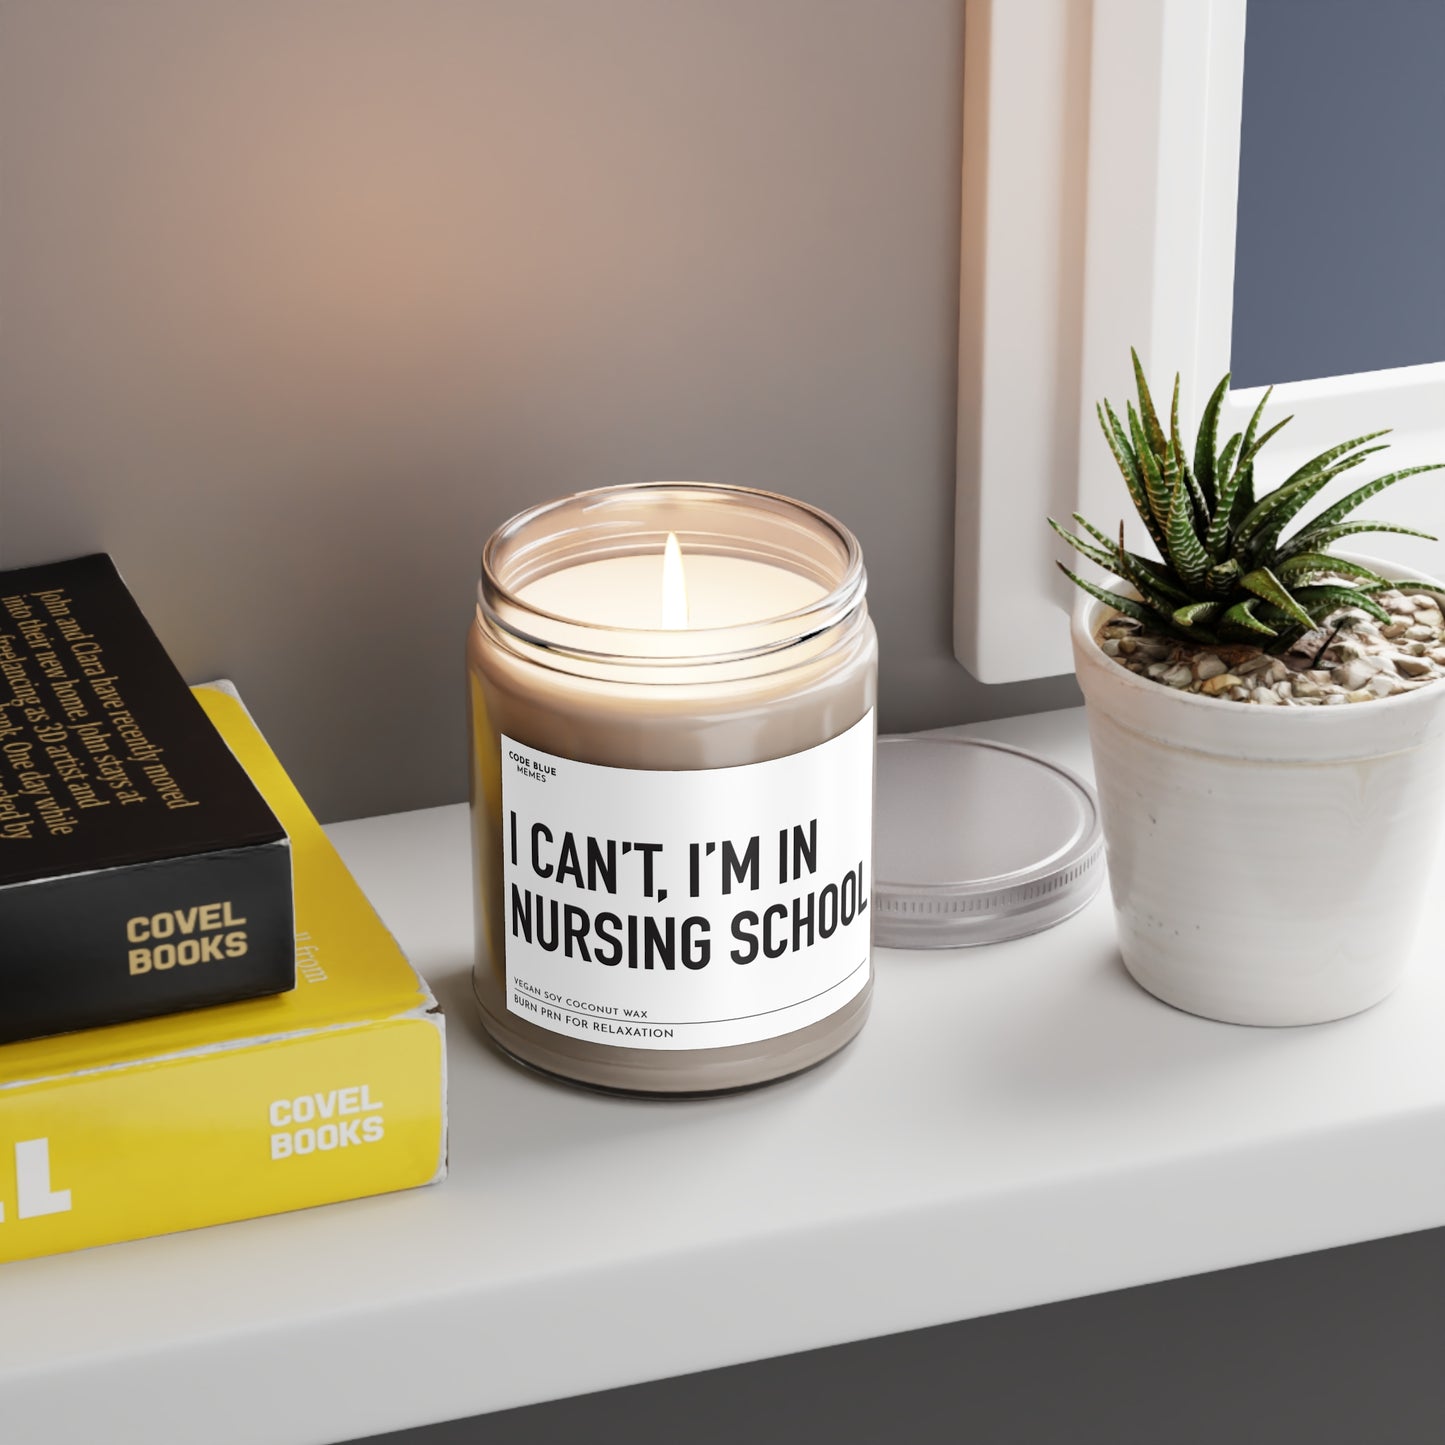 I Can't, I'm In Nursing School - Scented Candle